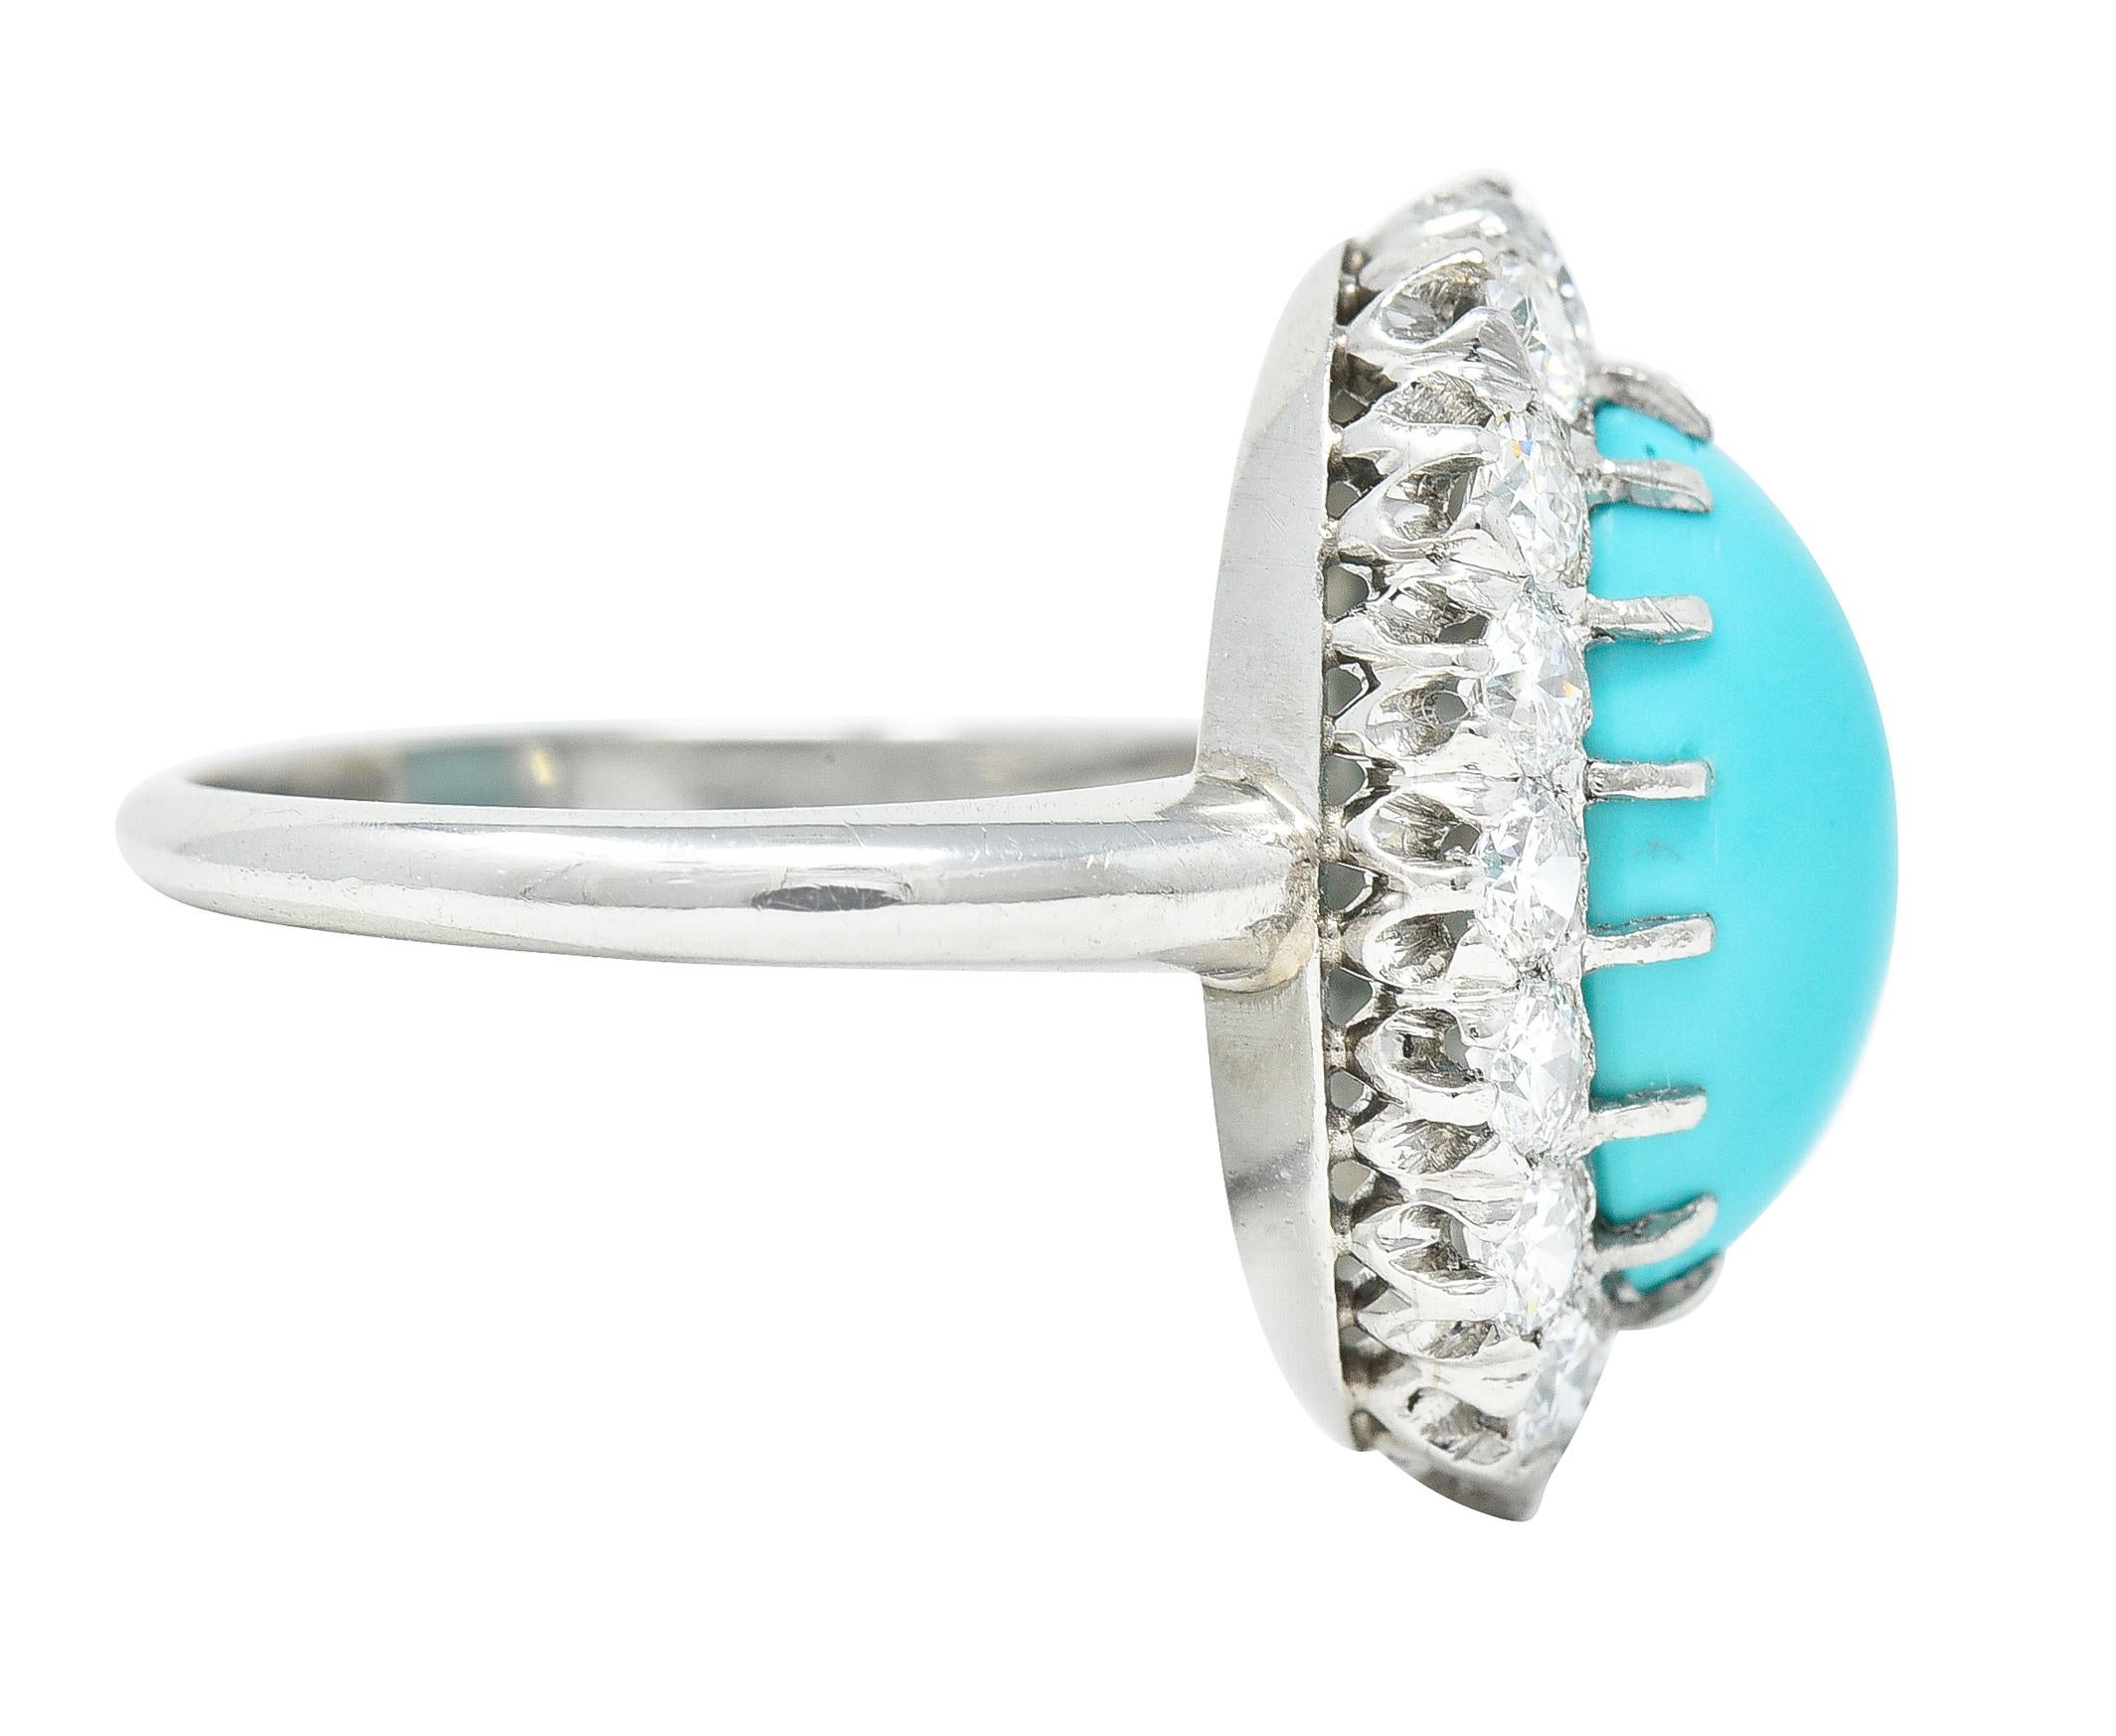 Oval Cut Art Deco 1.12 Carats Turquoise Cabochon Transitional Cut Diamond Platinum Ring For Sale